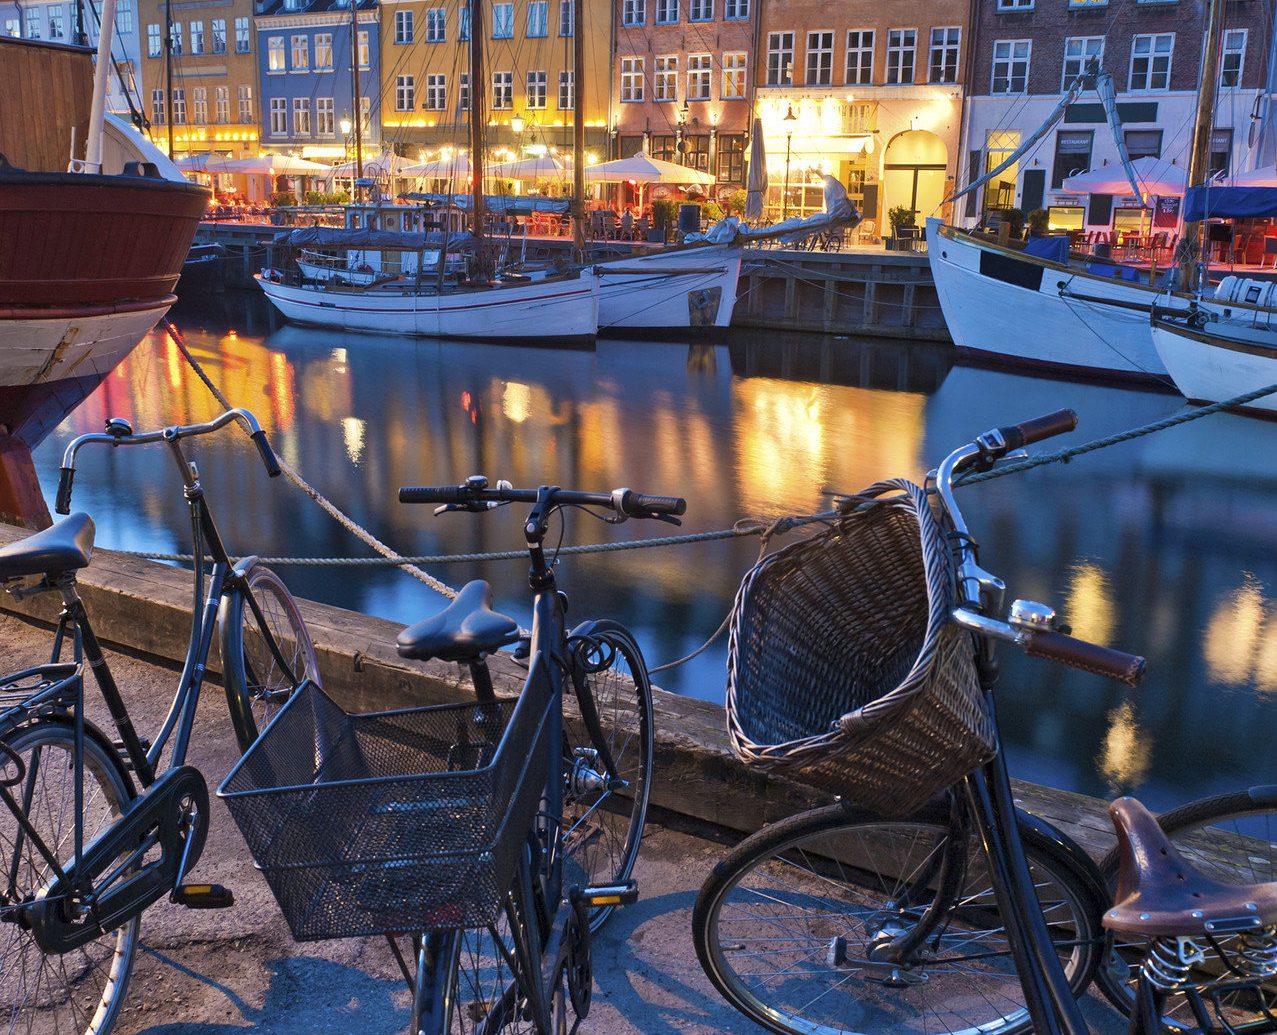 Trip Ideas outdoor sky bicycle vehicle Town City urban area human settlement Winter season cityscape evening waterway tourism parked street snow Canal